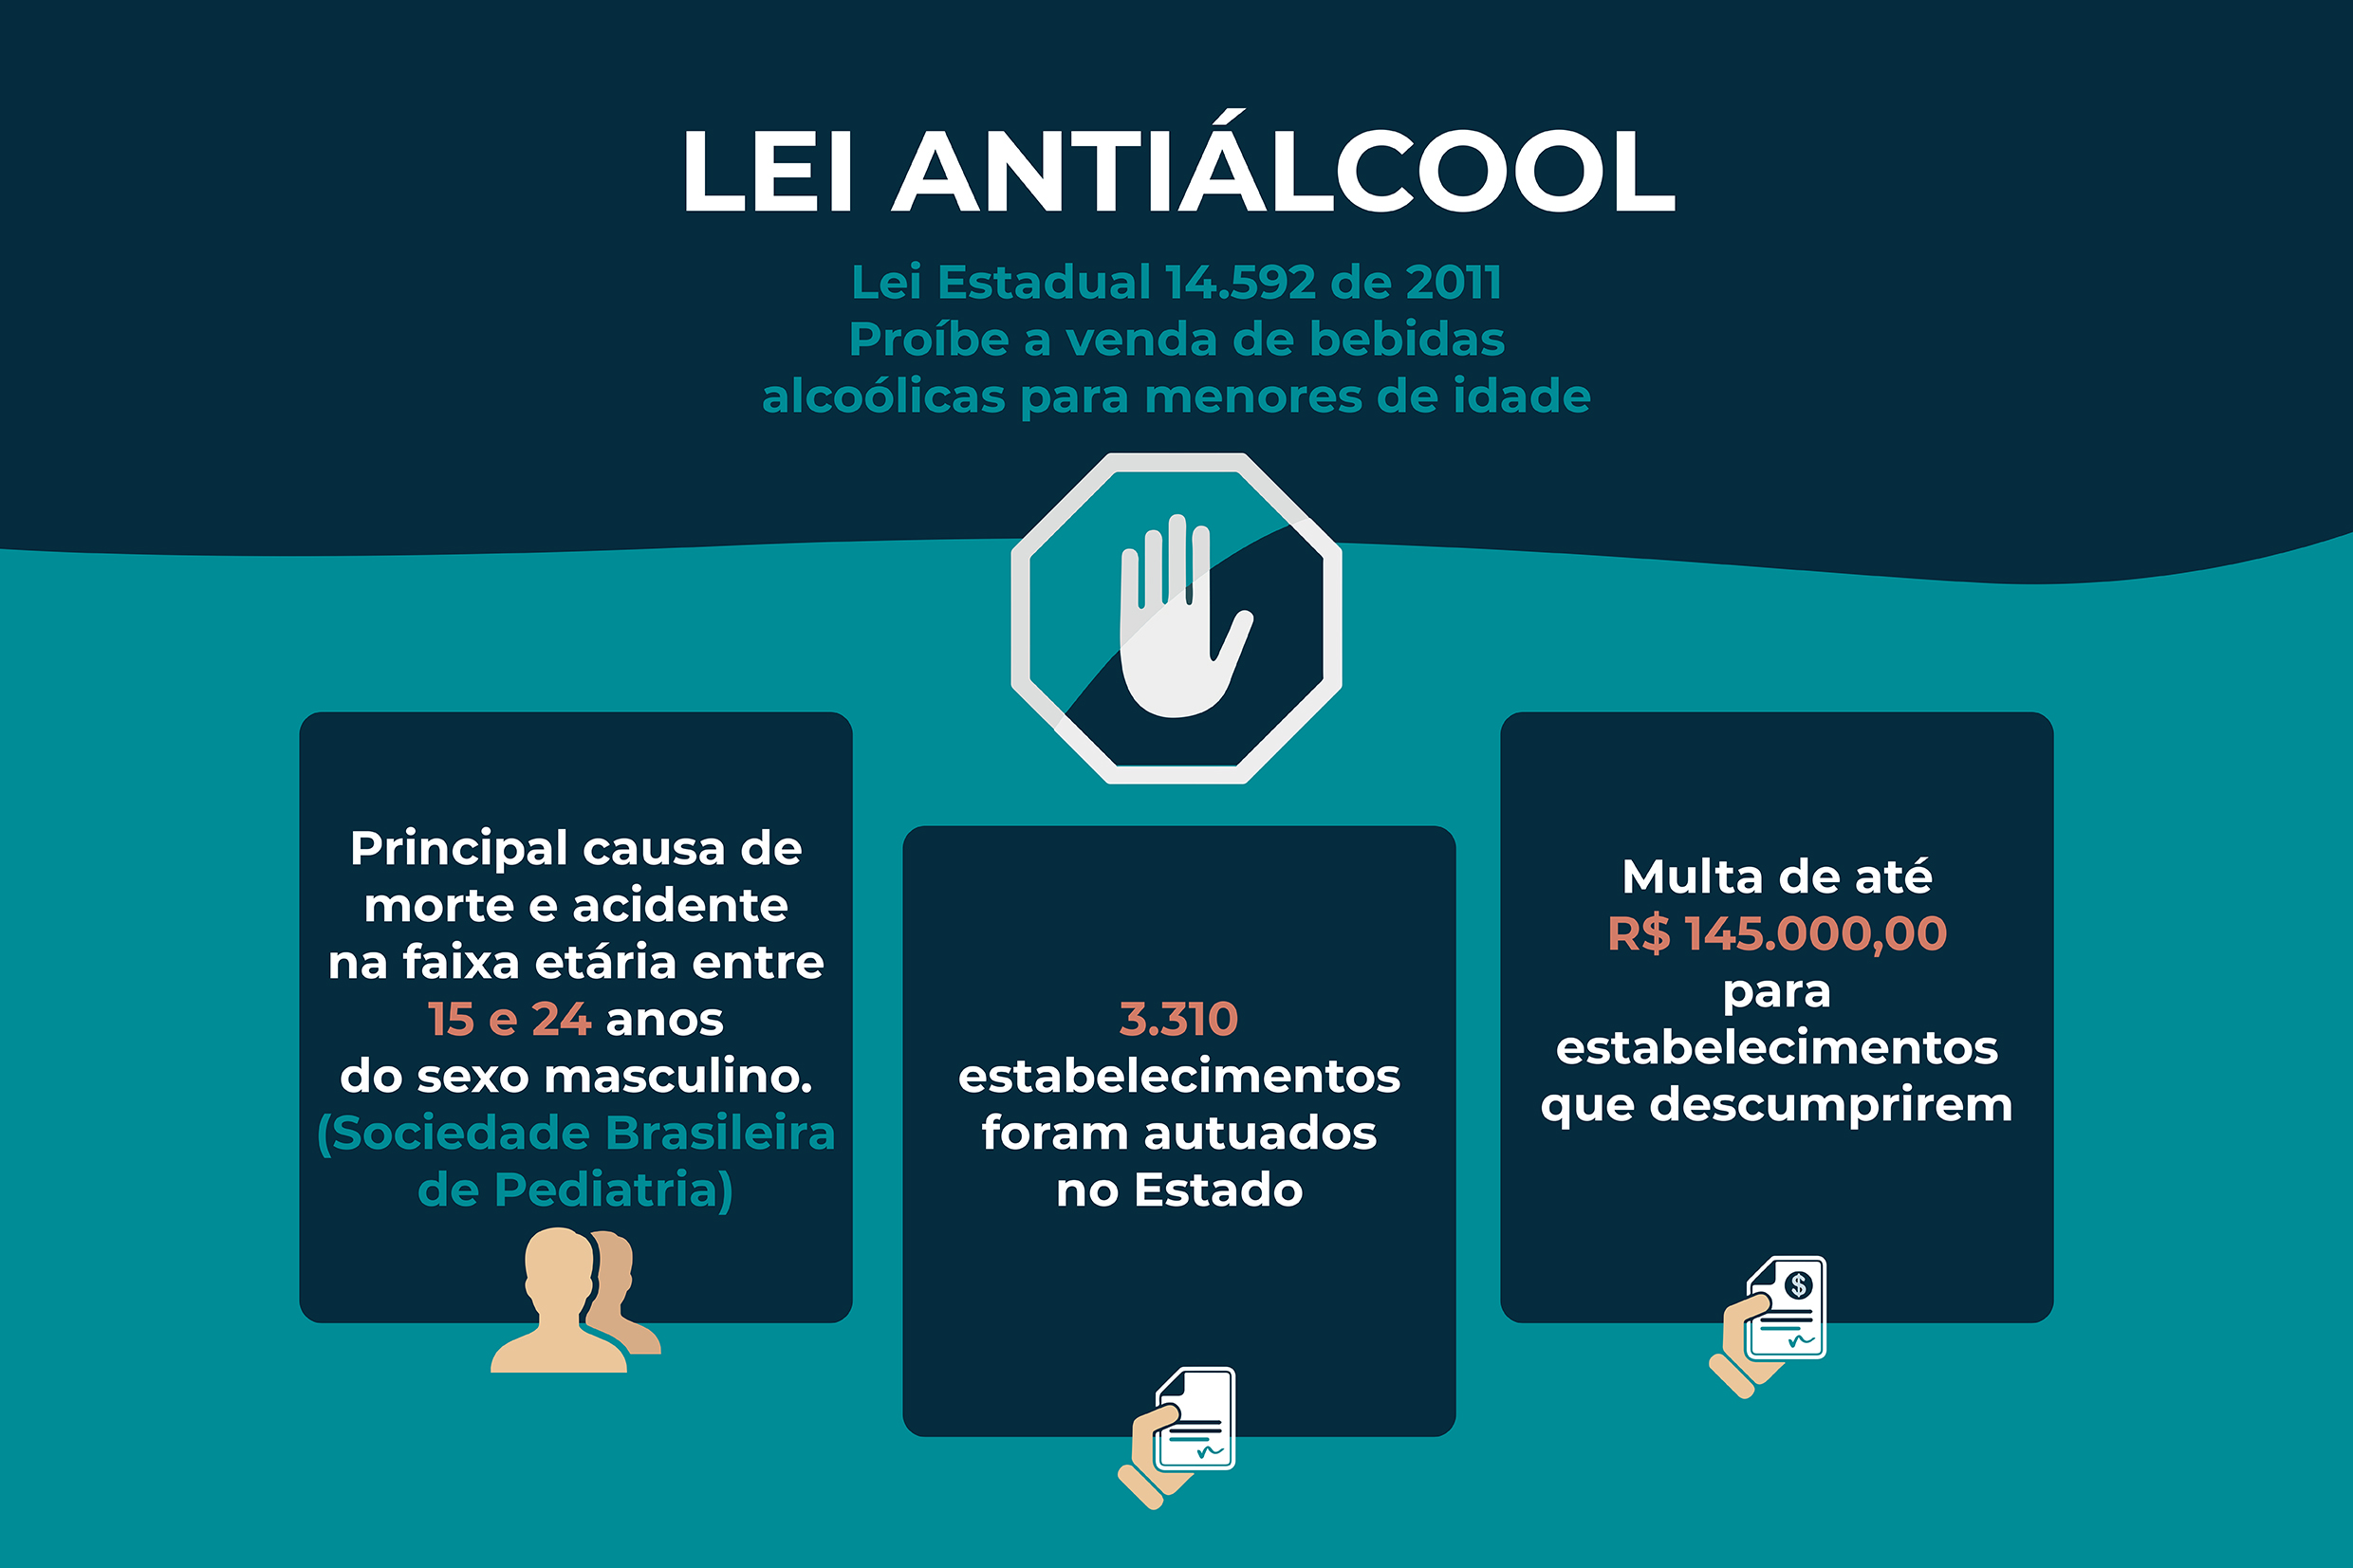 Infográfico<a style='float:right' href='https://www3.al.sp.gov.br/repositorio/noticia/N-07-2021/fg270666.jpg' target=_blank><img src='/_img/material-file-download-white.png' width='14px' alt='Clique para baixar a imagem'></a>